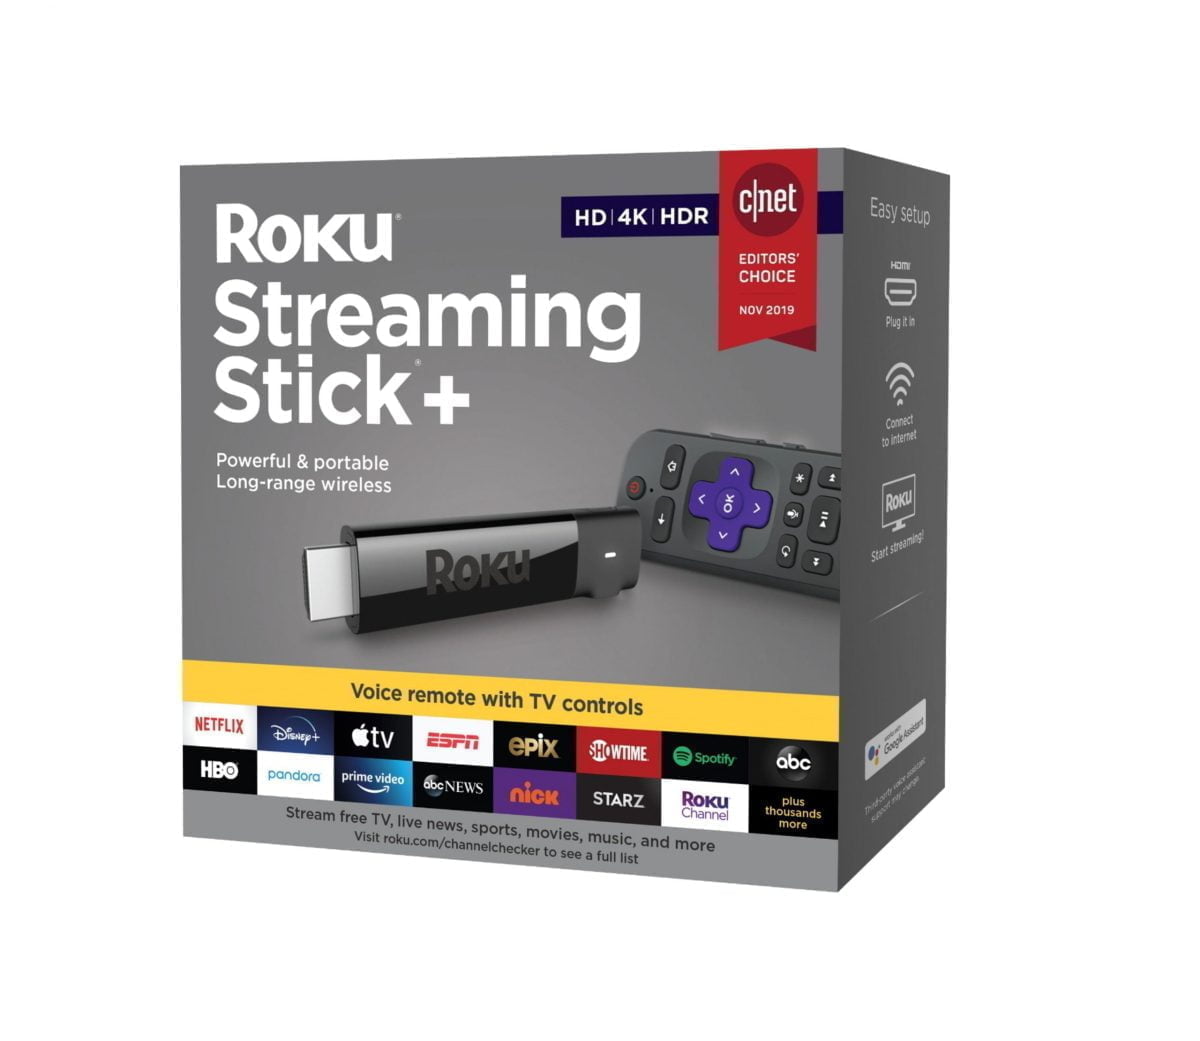 5948005Cv13D Scaled Roku &Amp;Lt;H1&Amp;Gt;Roku Streaming Stick+ 4K Streaming Media Player With Voice Remote With Tv Controls - Black&Amp;Lt;/H1&Amp;Gt; Enjoy Nonstop Entertainment With The Roku Streaming Stick+. Its Wireless Receiver Provides A Strong Signal For Smooth Streaming In Rooms Far From The Router, And It Supports 4K, Hd And Hdr Resolutions For Crisp, Colorful Pictures. Take This Compact Roku Streaming Stick+ With You On Vacation For Enjoying Shows Away From Home. Roku Streaming Stick+ 4K Streaming Media Player With Voice Remote With Tv Controls - Black